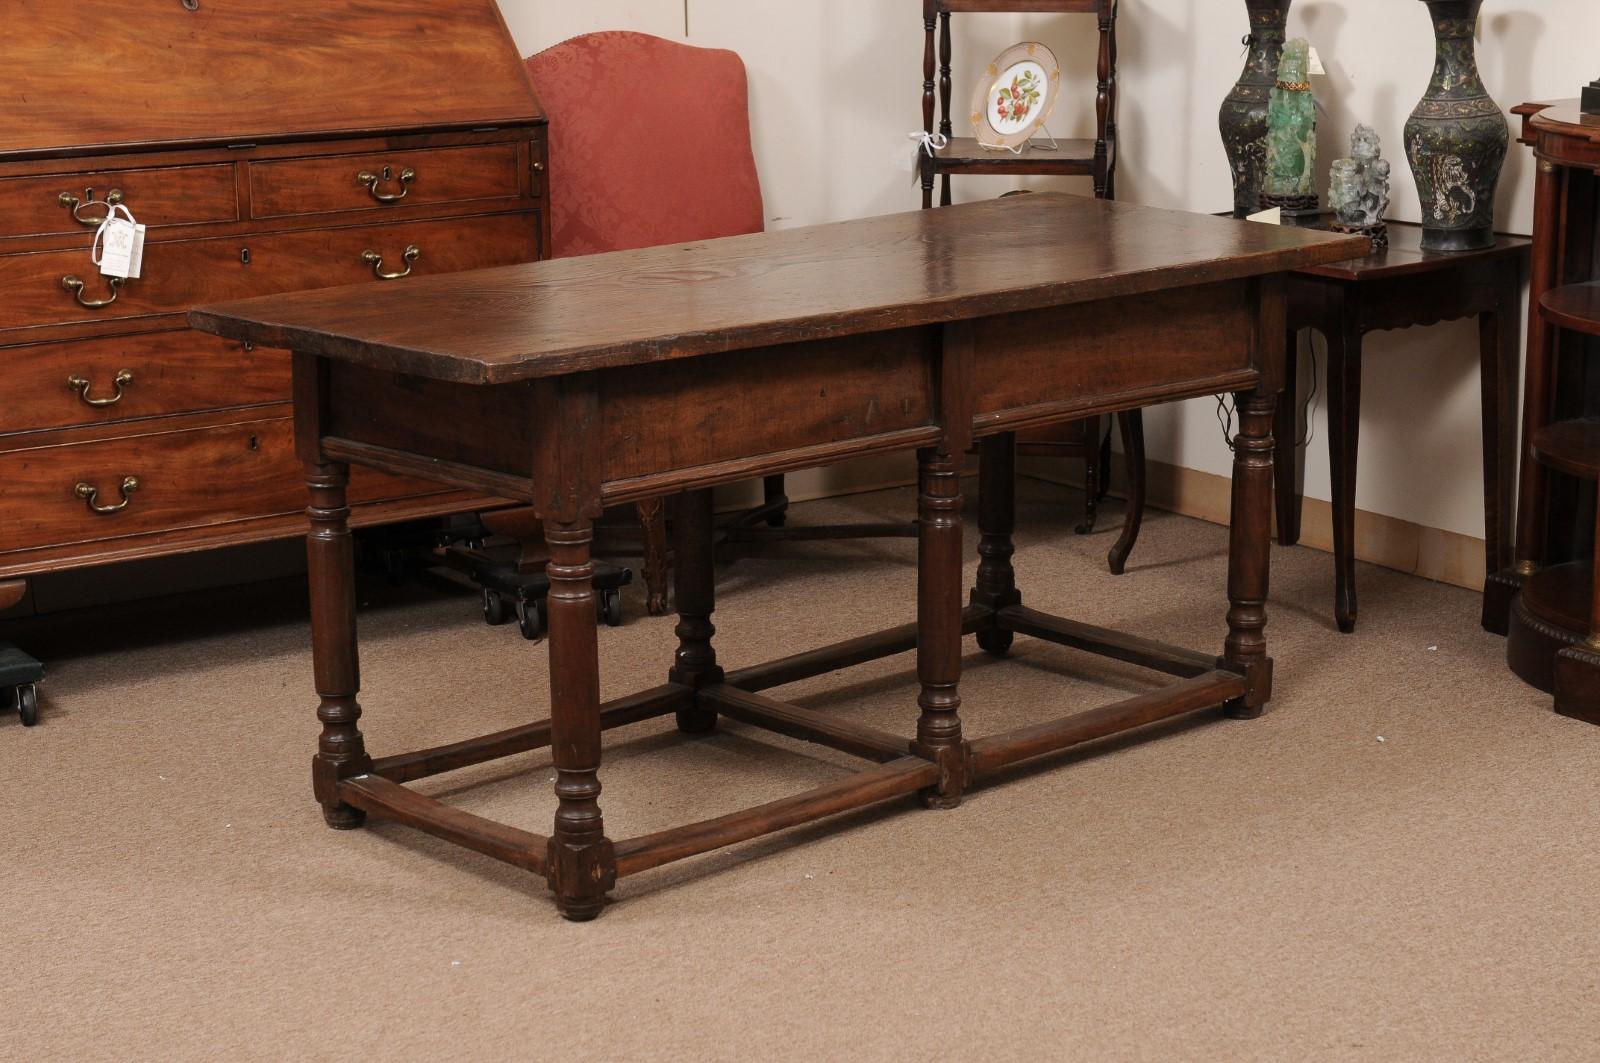  17th Century Italian Refractory Table in Elm with Inlay, 2 Drawers & Turned Leg 6